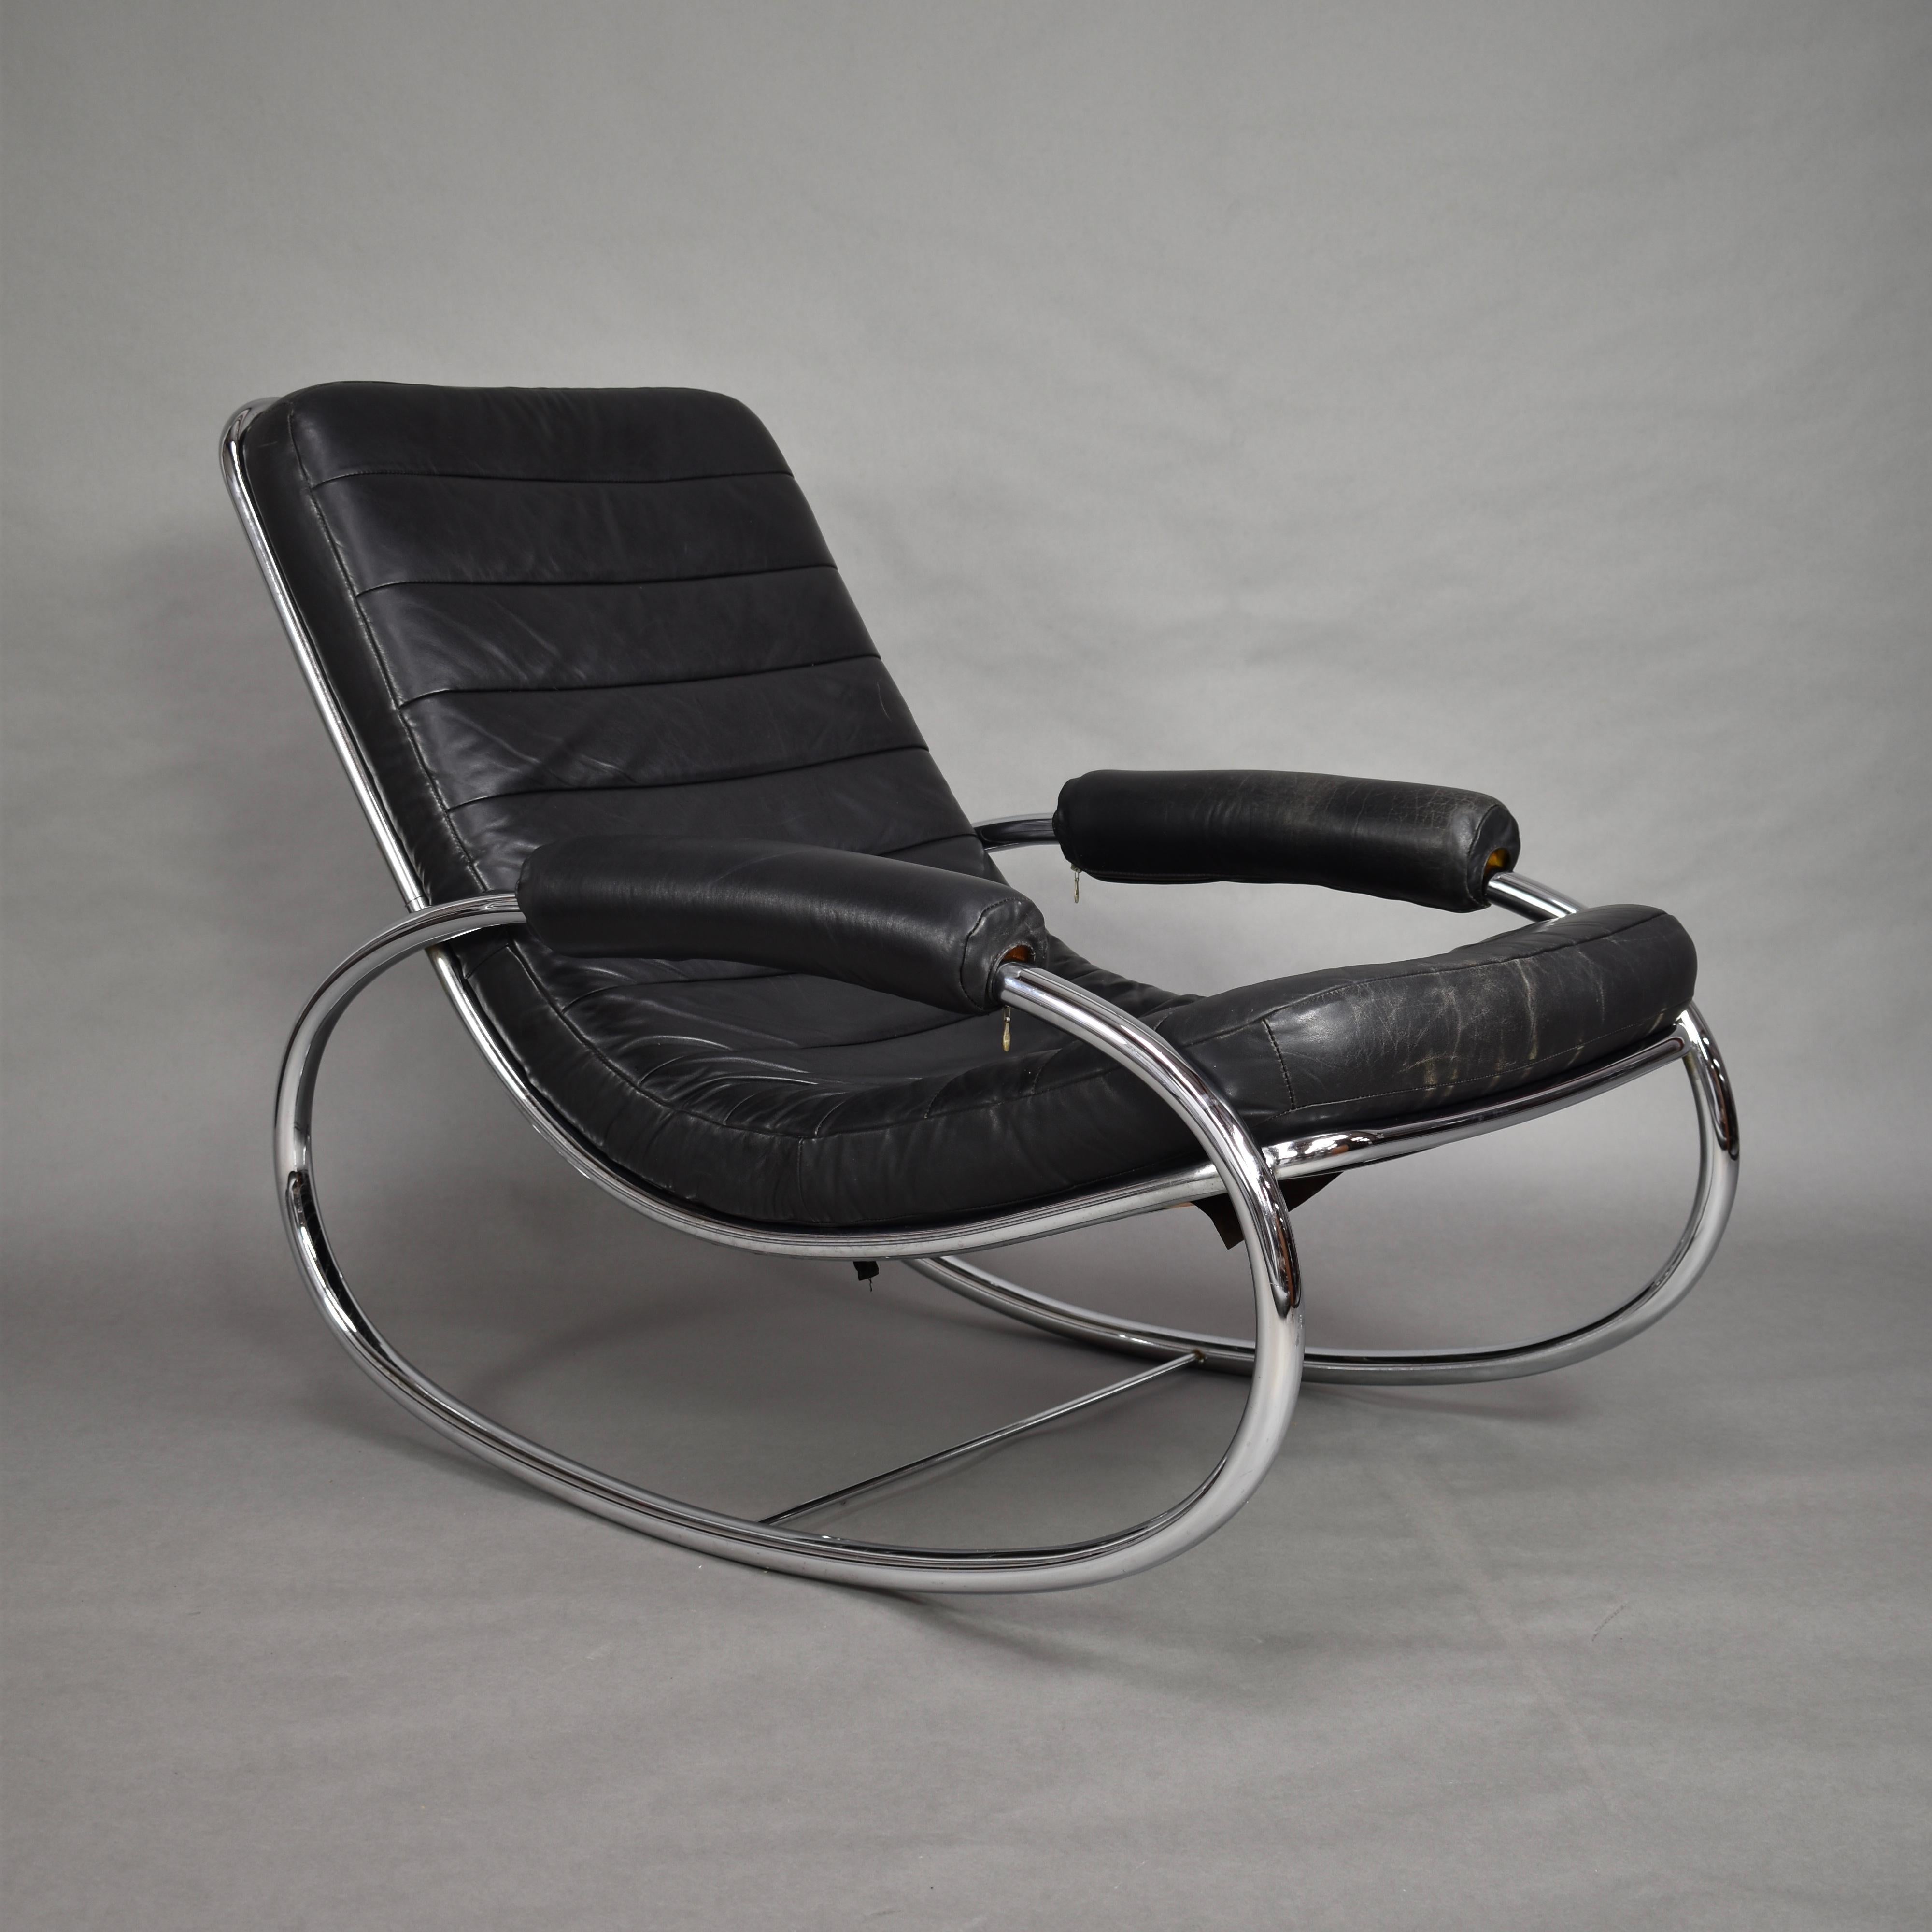 Italian rocking chair in the style of Milo Baughman or Guido Faleschini.

Designer: Unknown

Manufacturer: Unknown

Country: Italy

Model: Rocking chair

Design period: 1970s

Date of manufacturing: 1970s-1980s

Size cm: W 115 x D 70 x